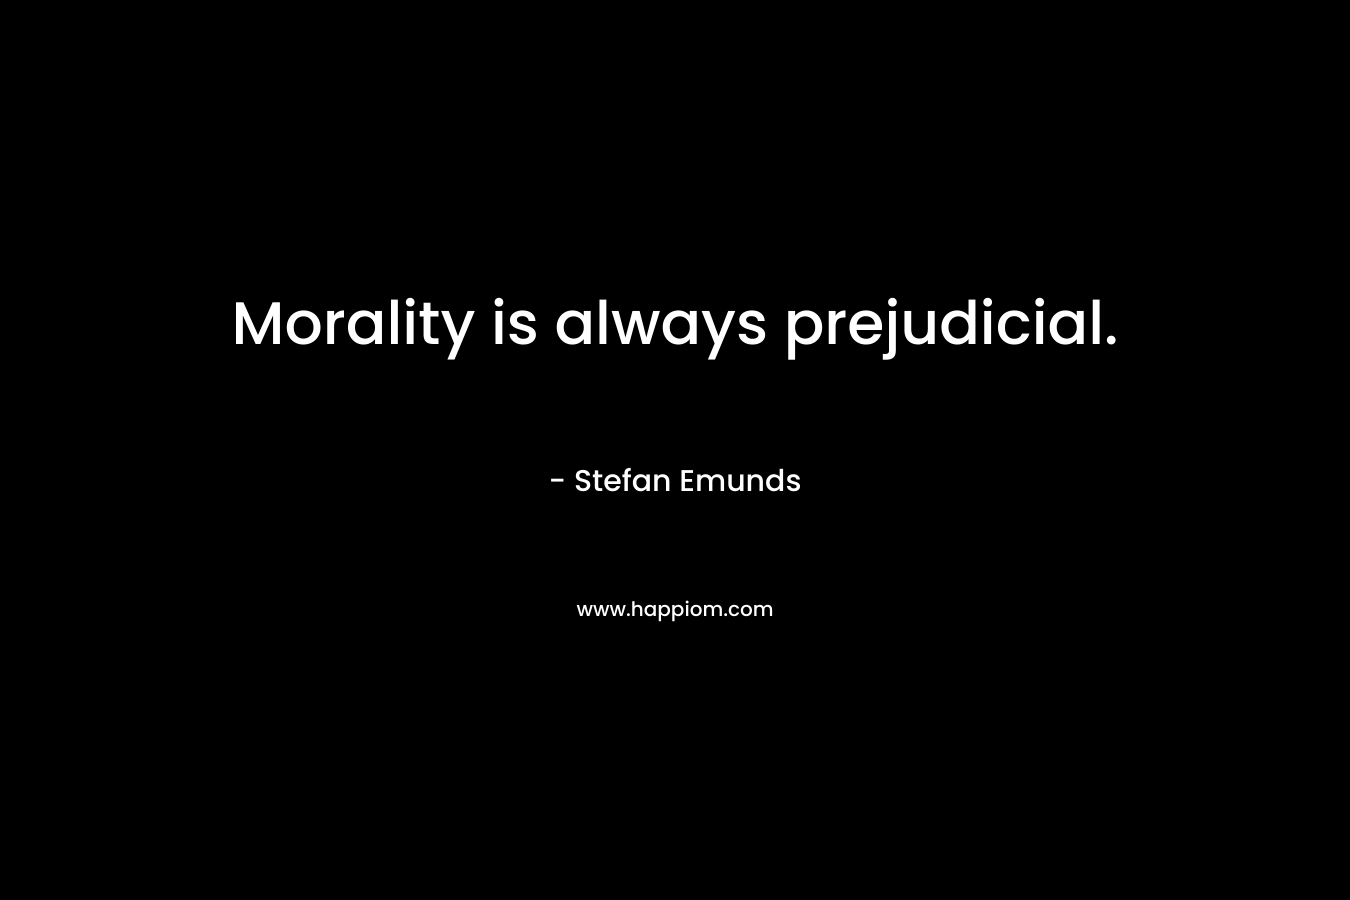 Morality is always prejudicial.